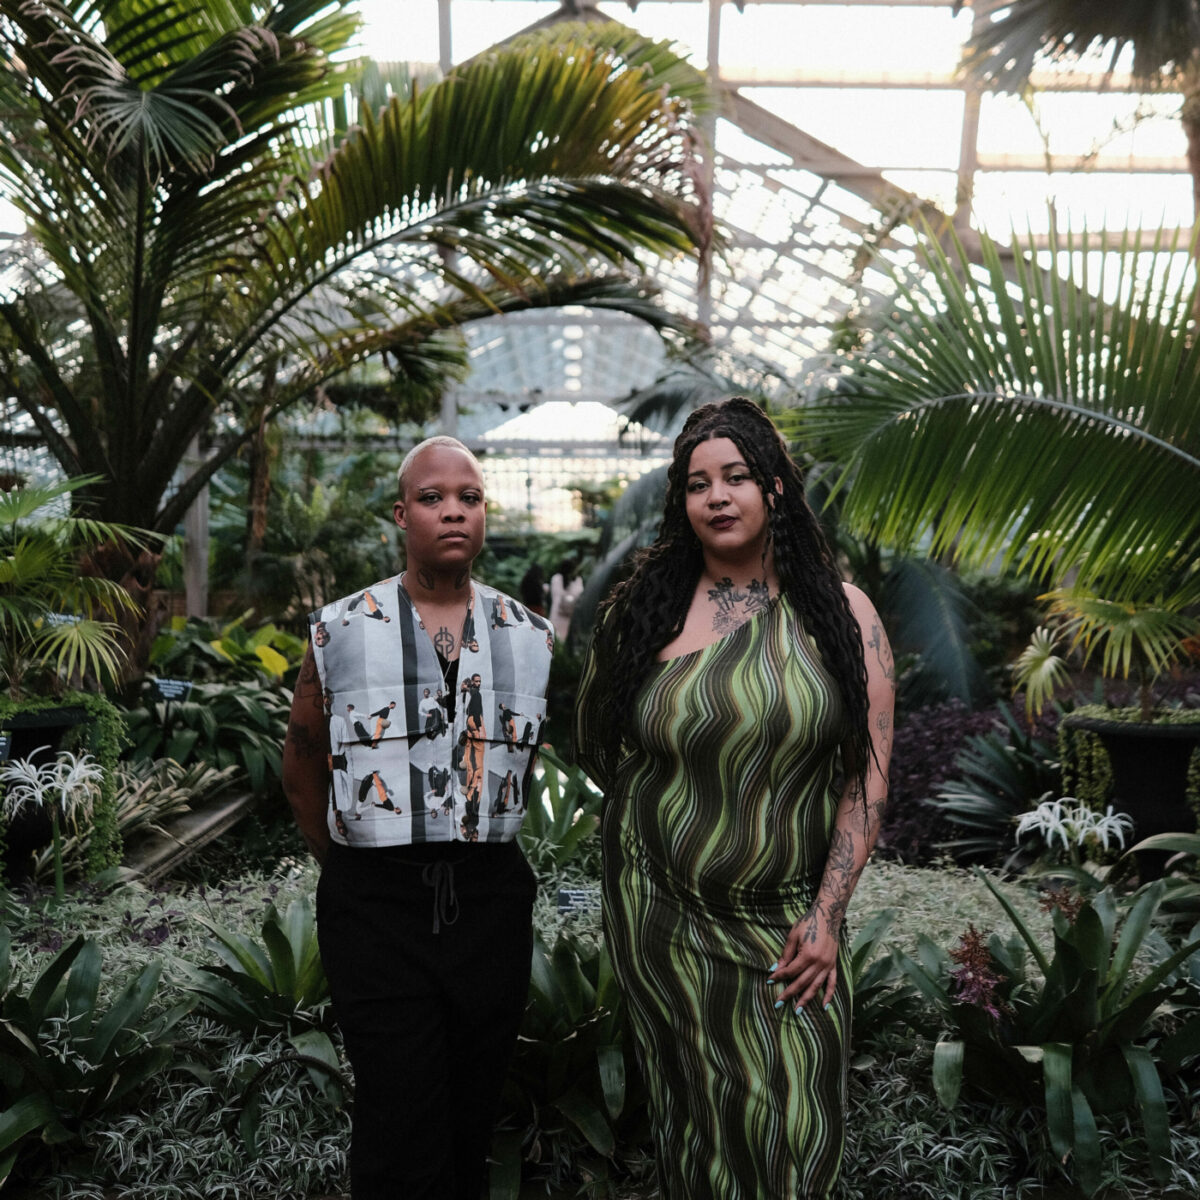 Kee Merriweather (left) and Onyx Engobor (right) stand in the Garfield Park Conservatory Palm House during the “Otherworldly” gallery opening. Photo by Sulyiman Stokes